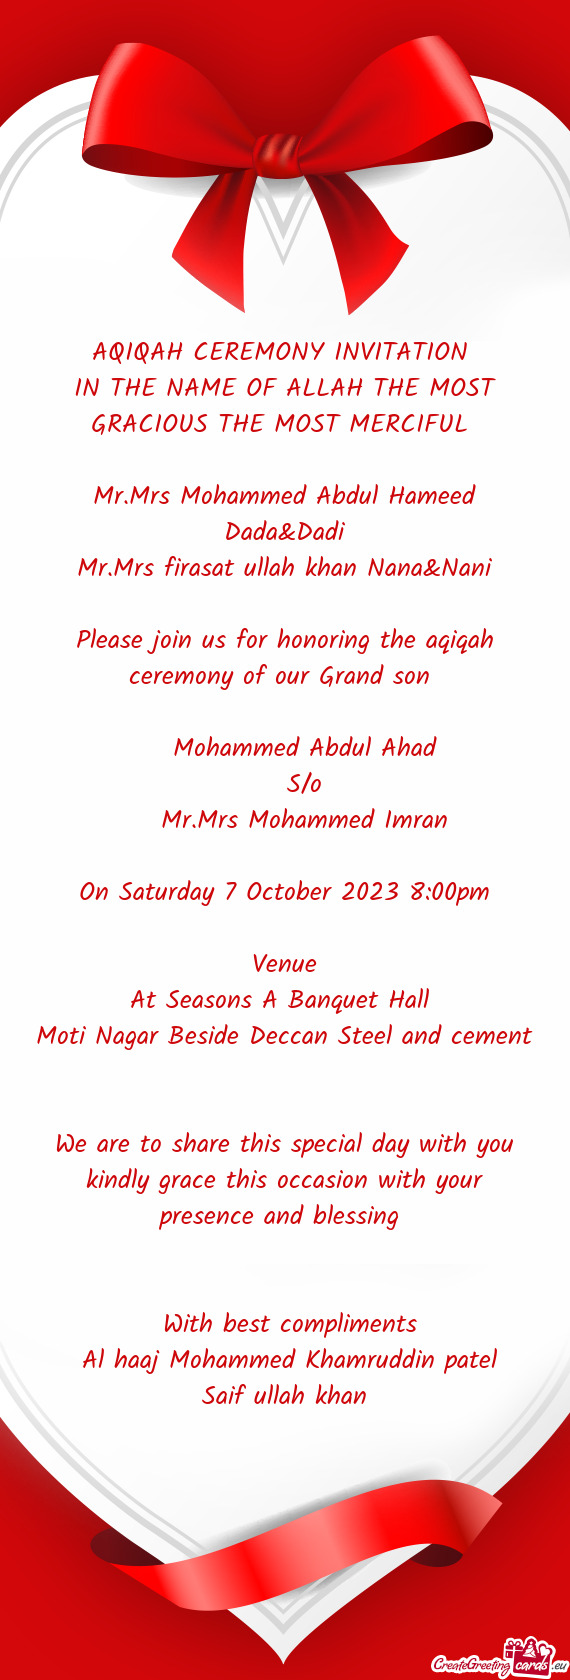 AQIQAH CEREMONY INVITATION IN THE NAME OF ALLAH THE MOST GRACIOUS THE MOST MERCIFUL  Mr